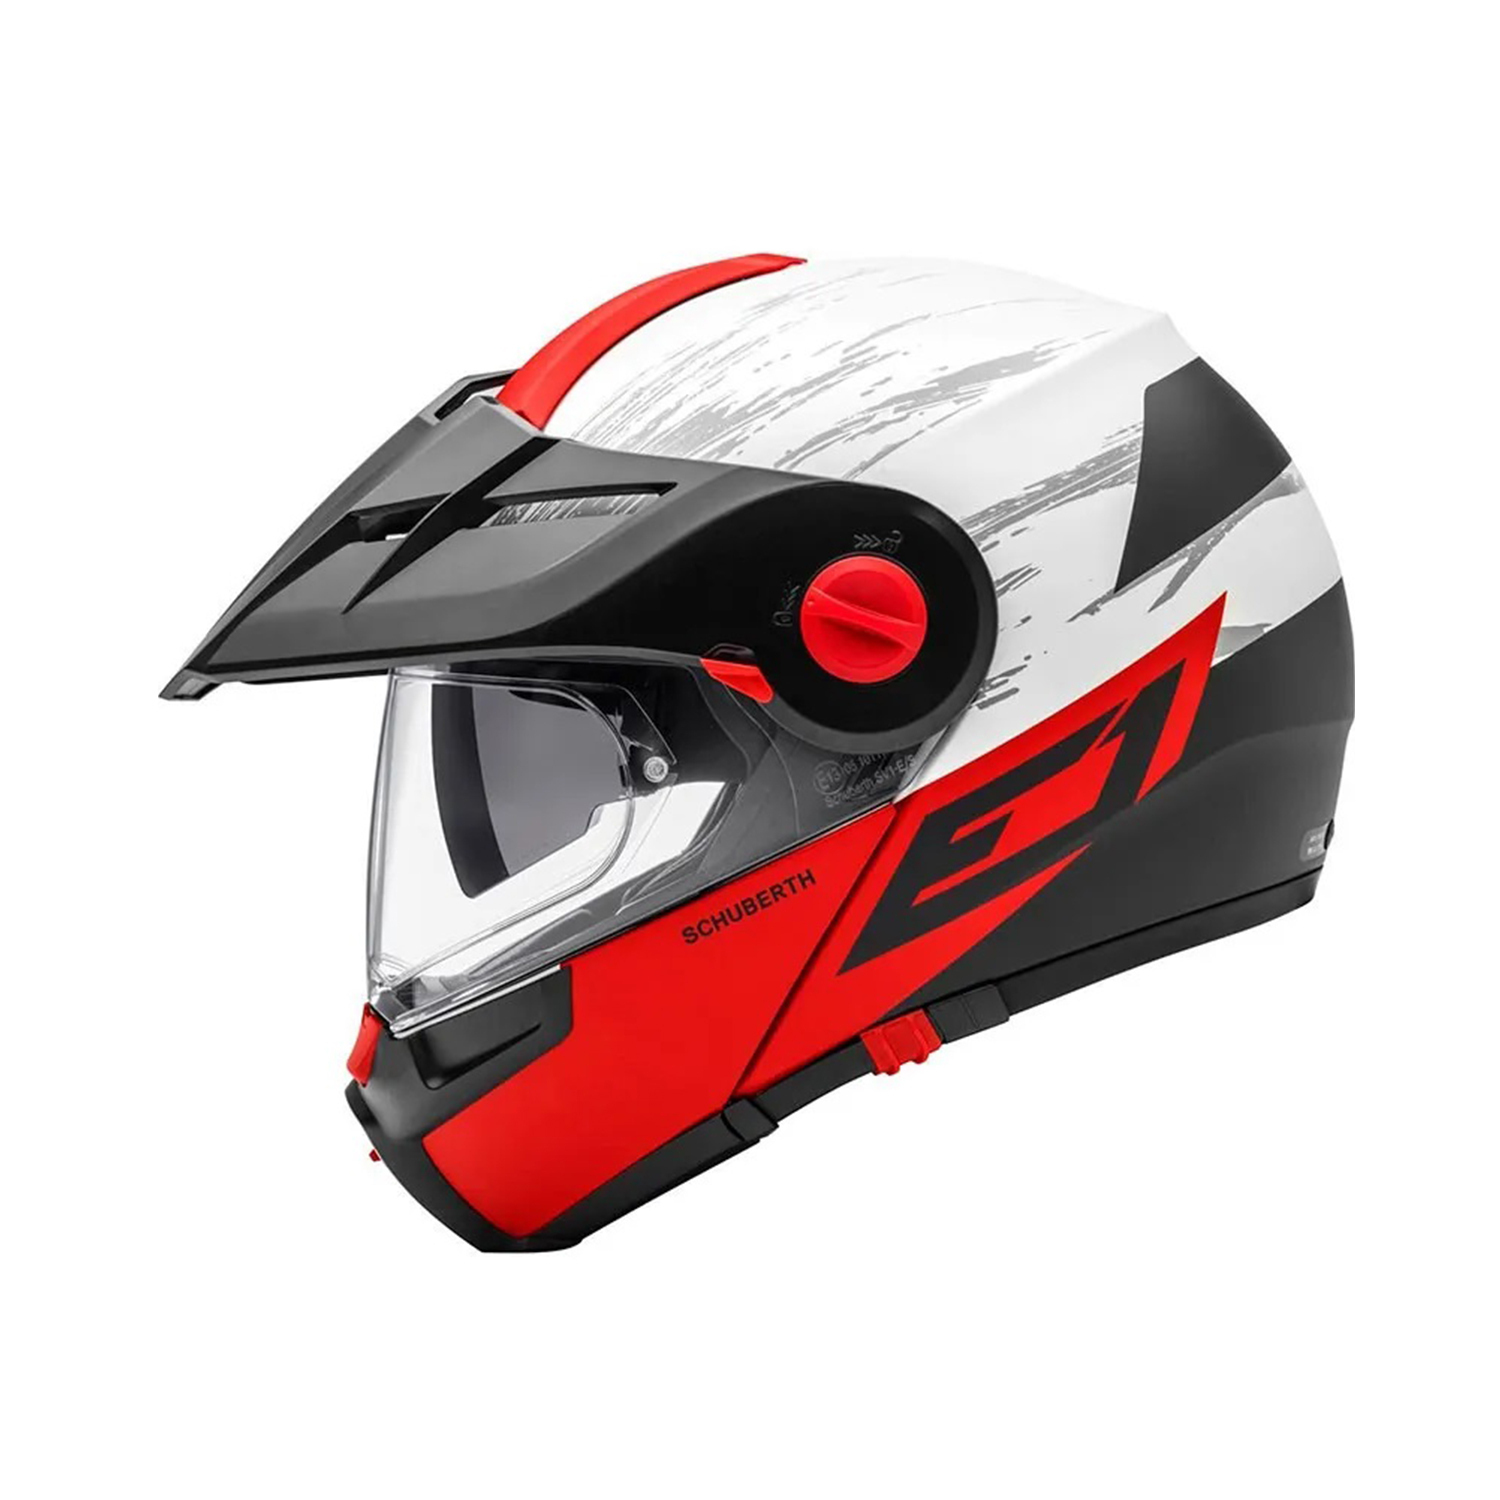 Schuberth E1 Adventure Helmet Crossfire Red - Available in Various Sizes